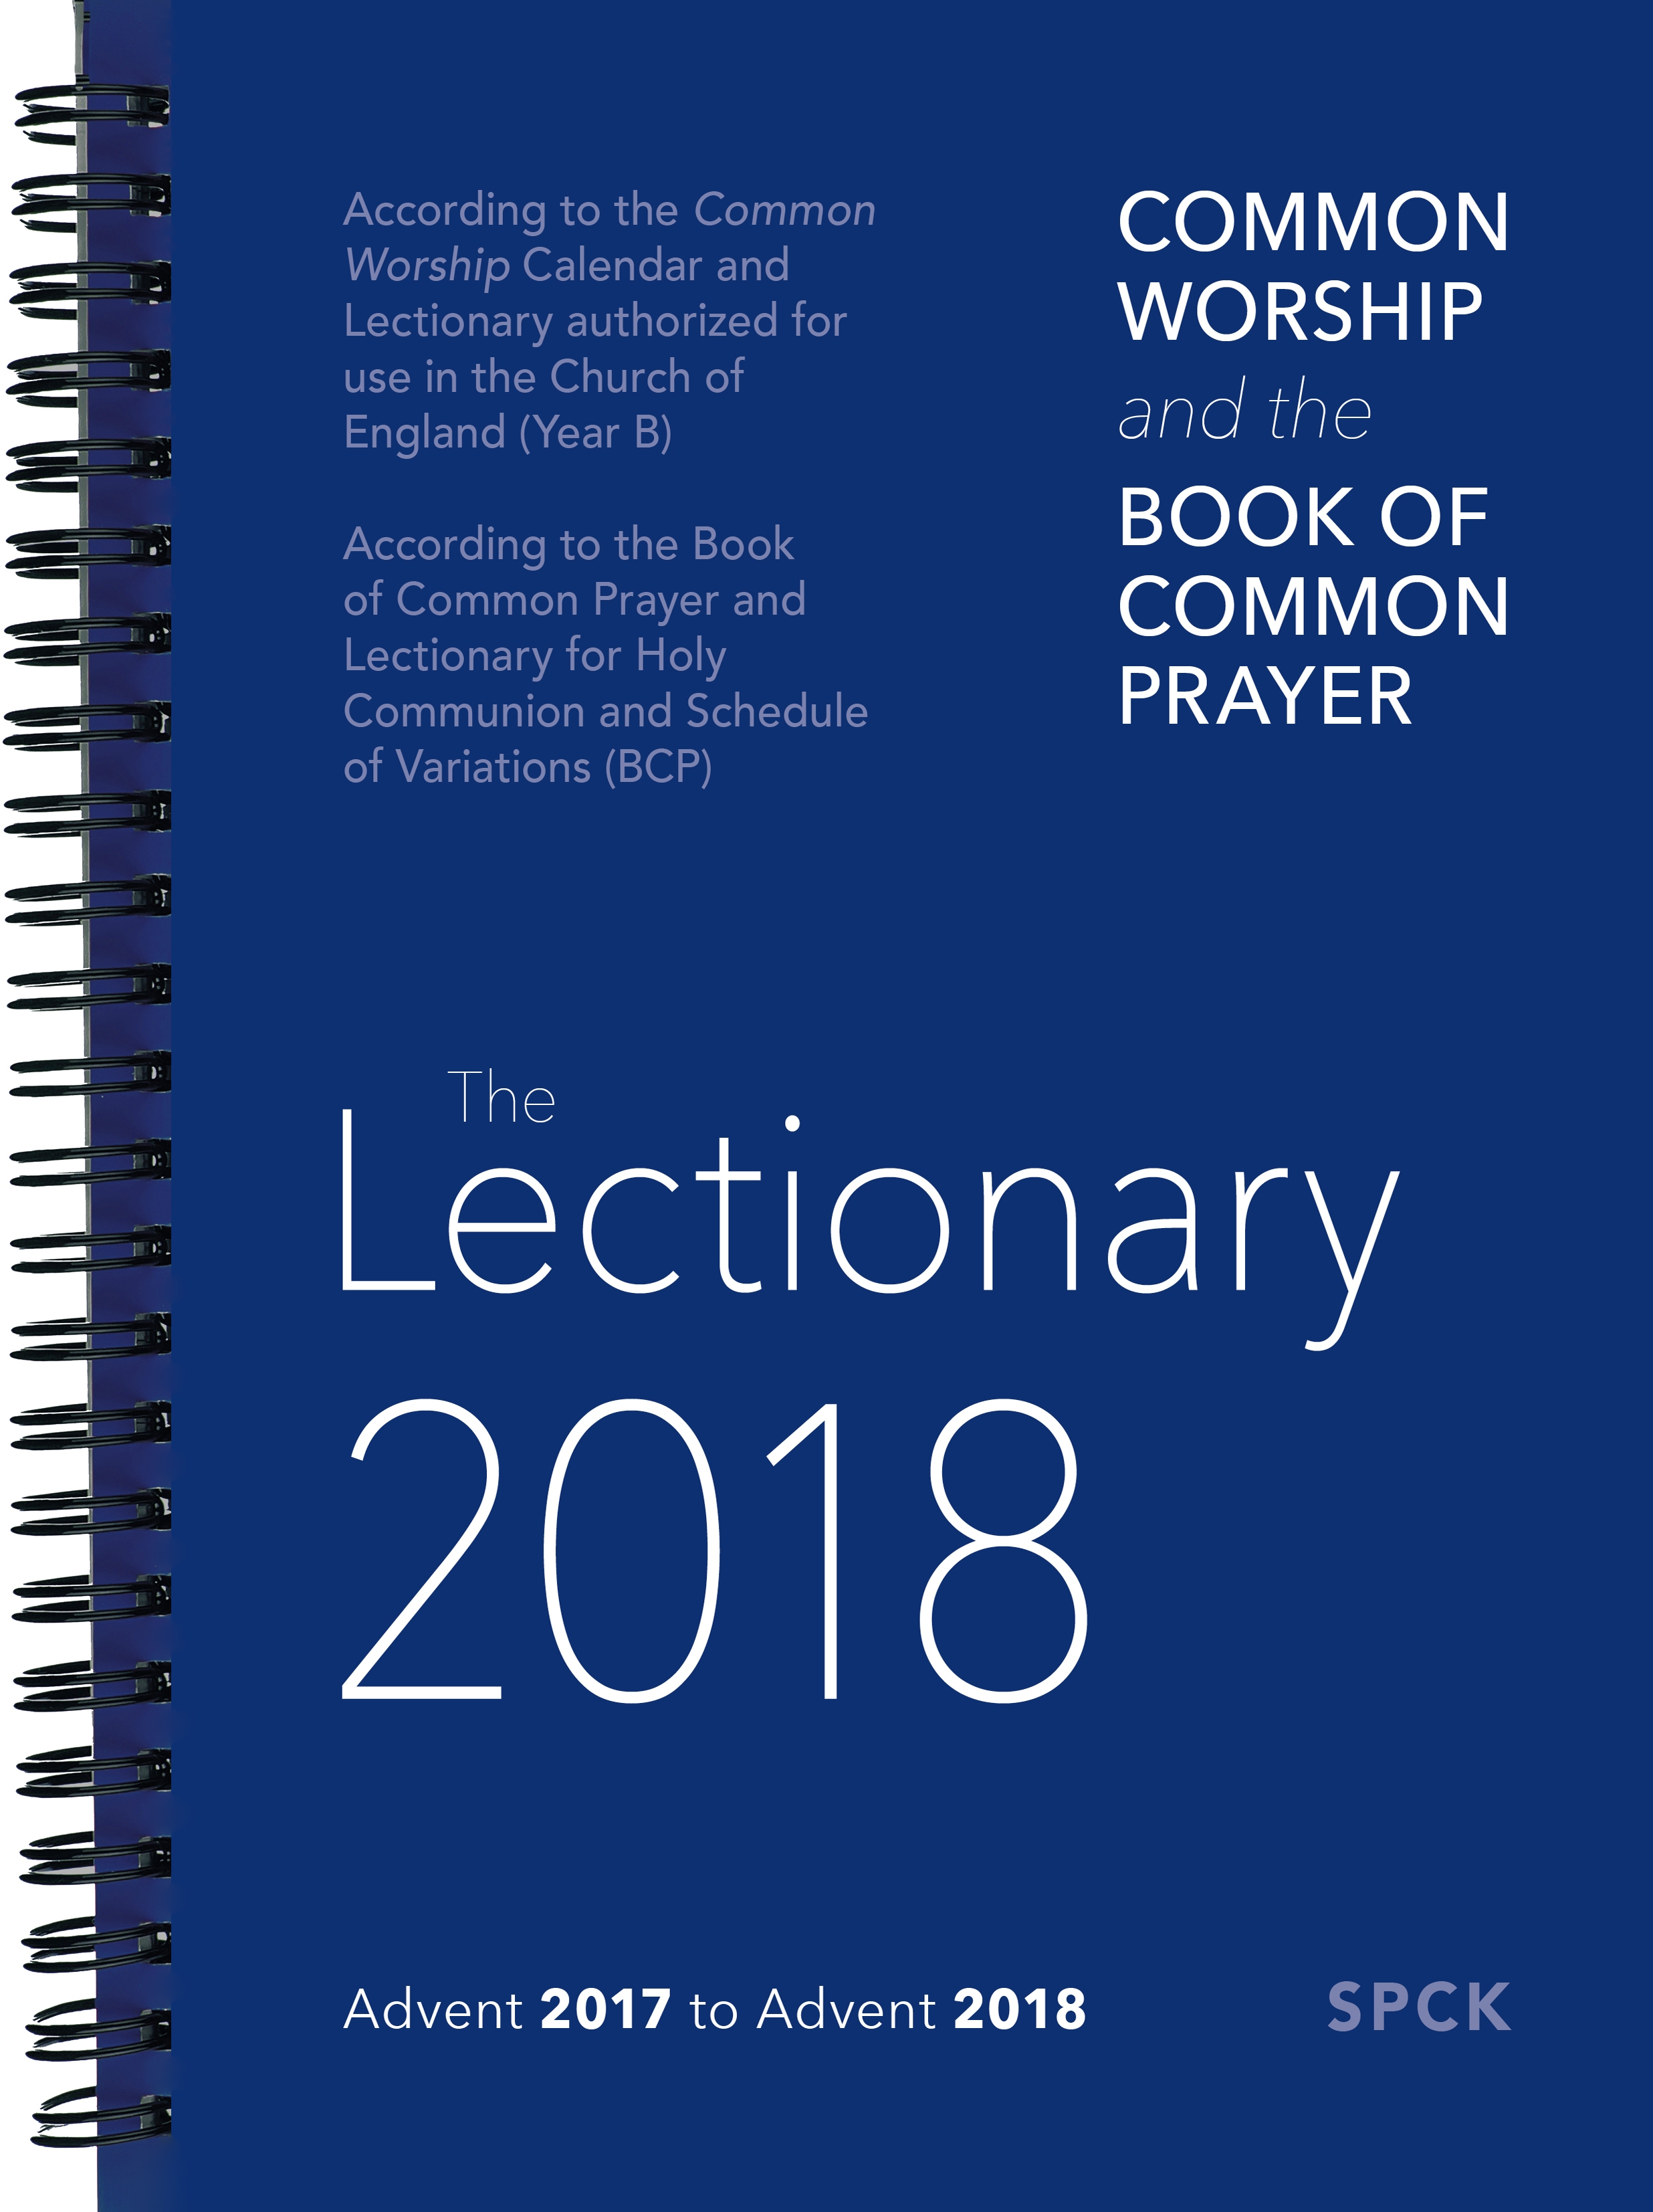 The Common Worship Lectionary 2018 Spiral Bound Free Delivery when